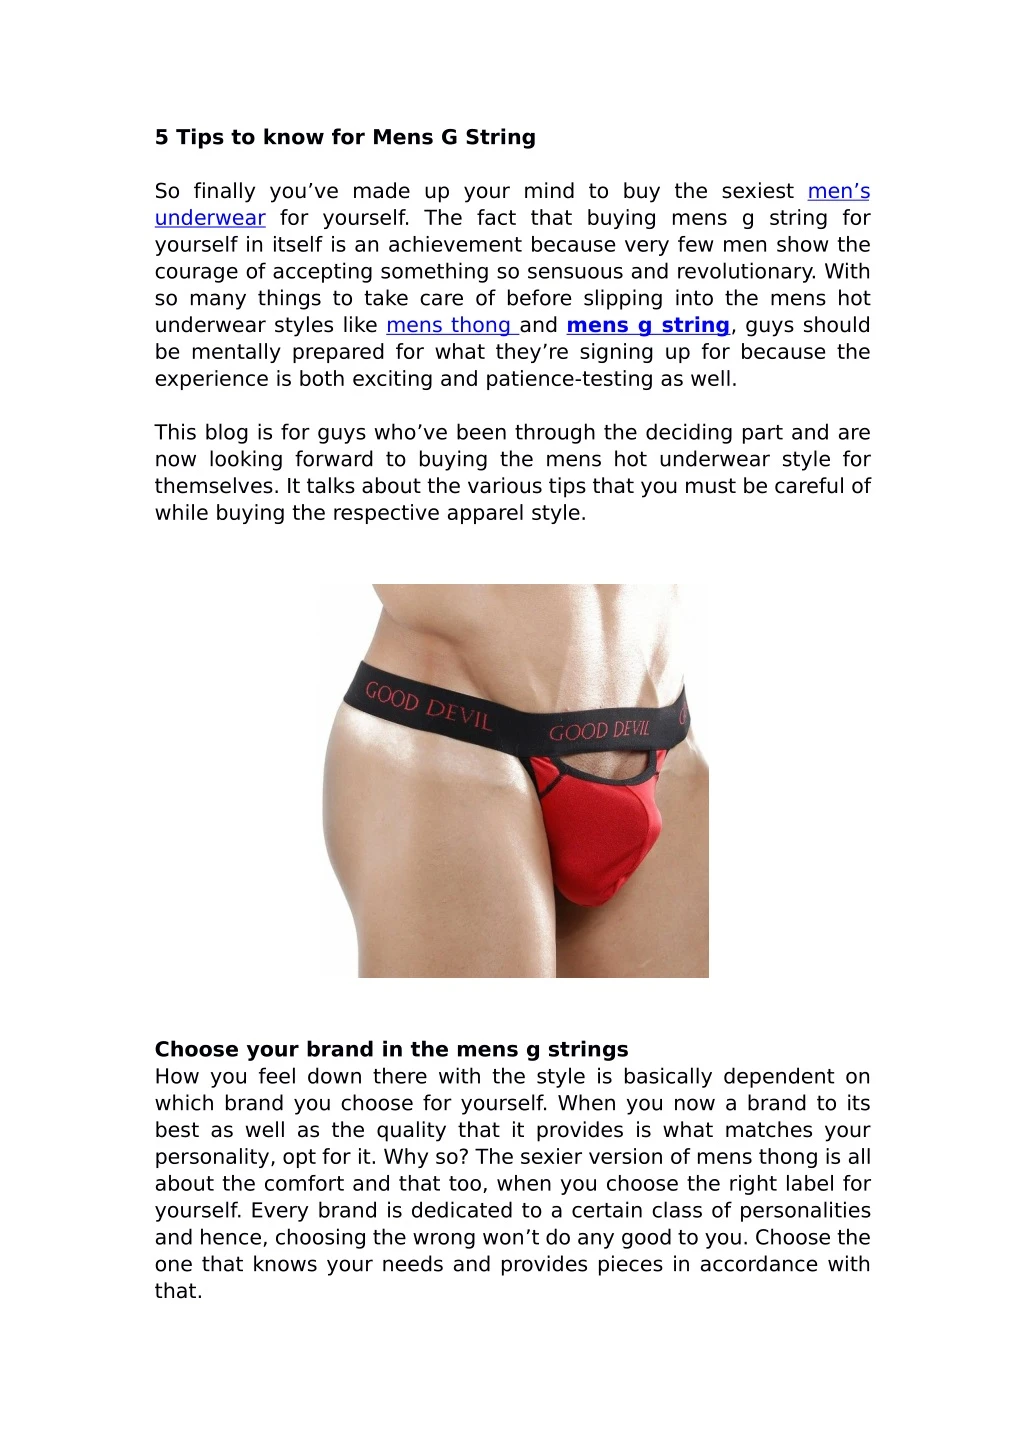 5 tips to know for mens g string n.